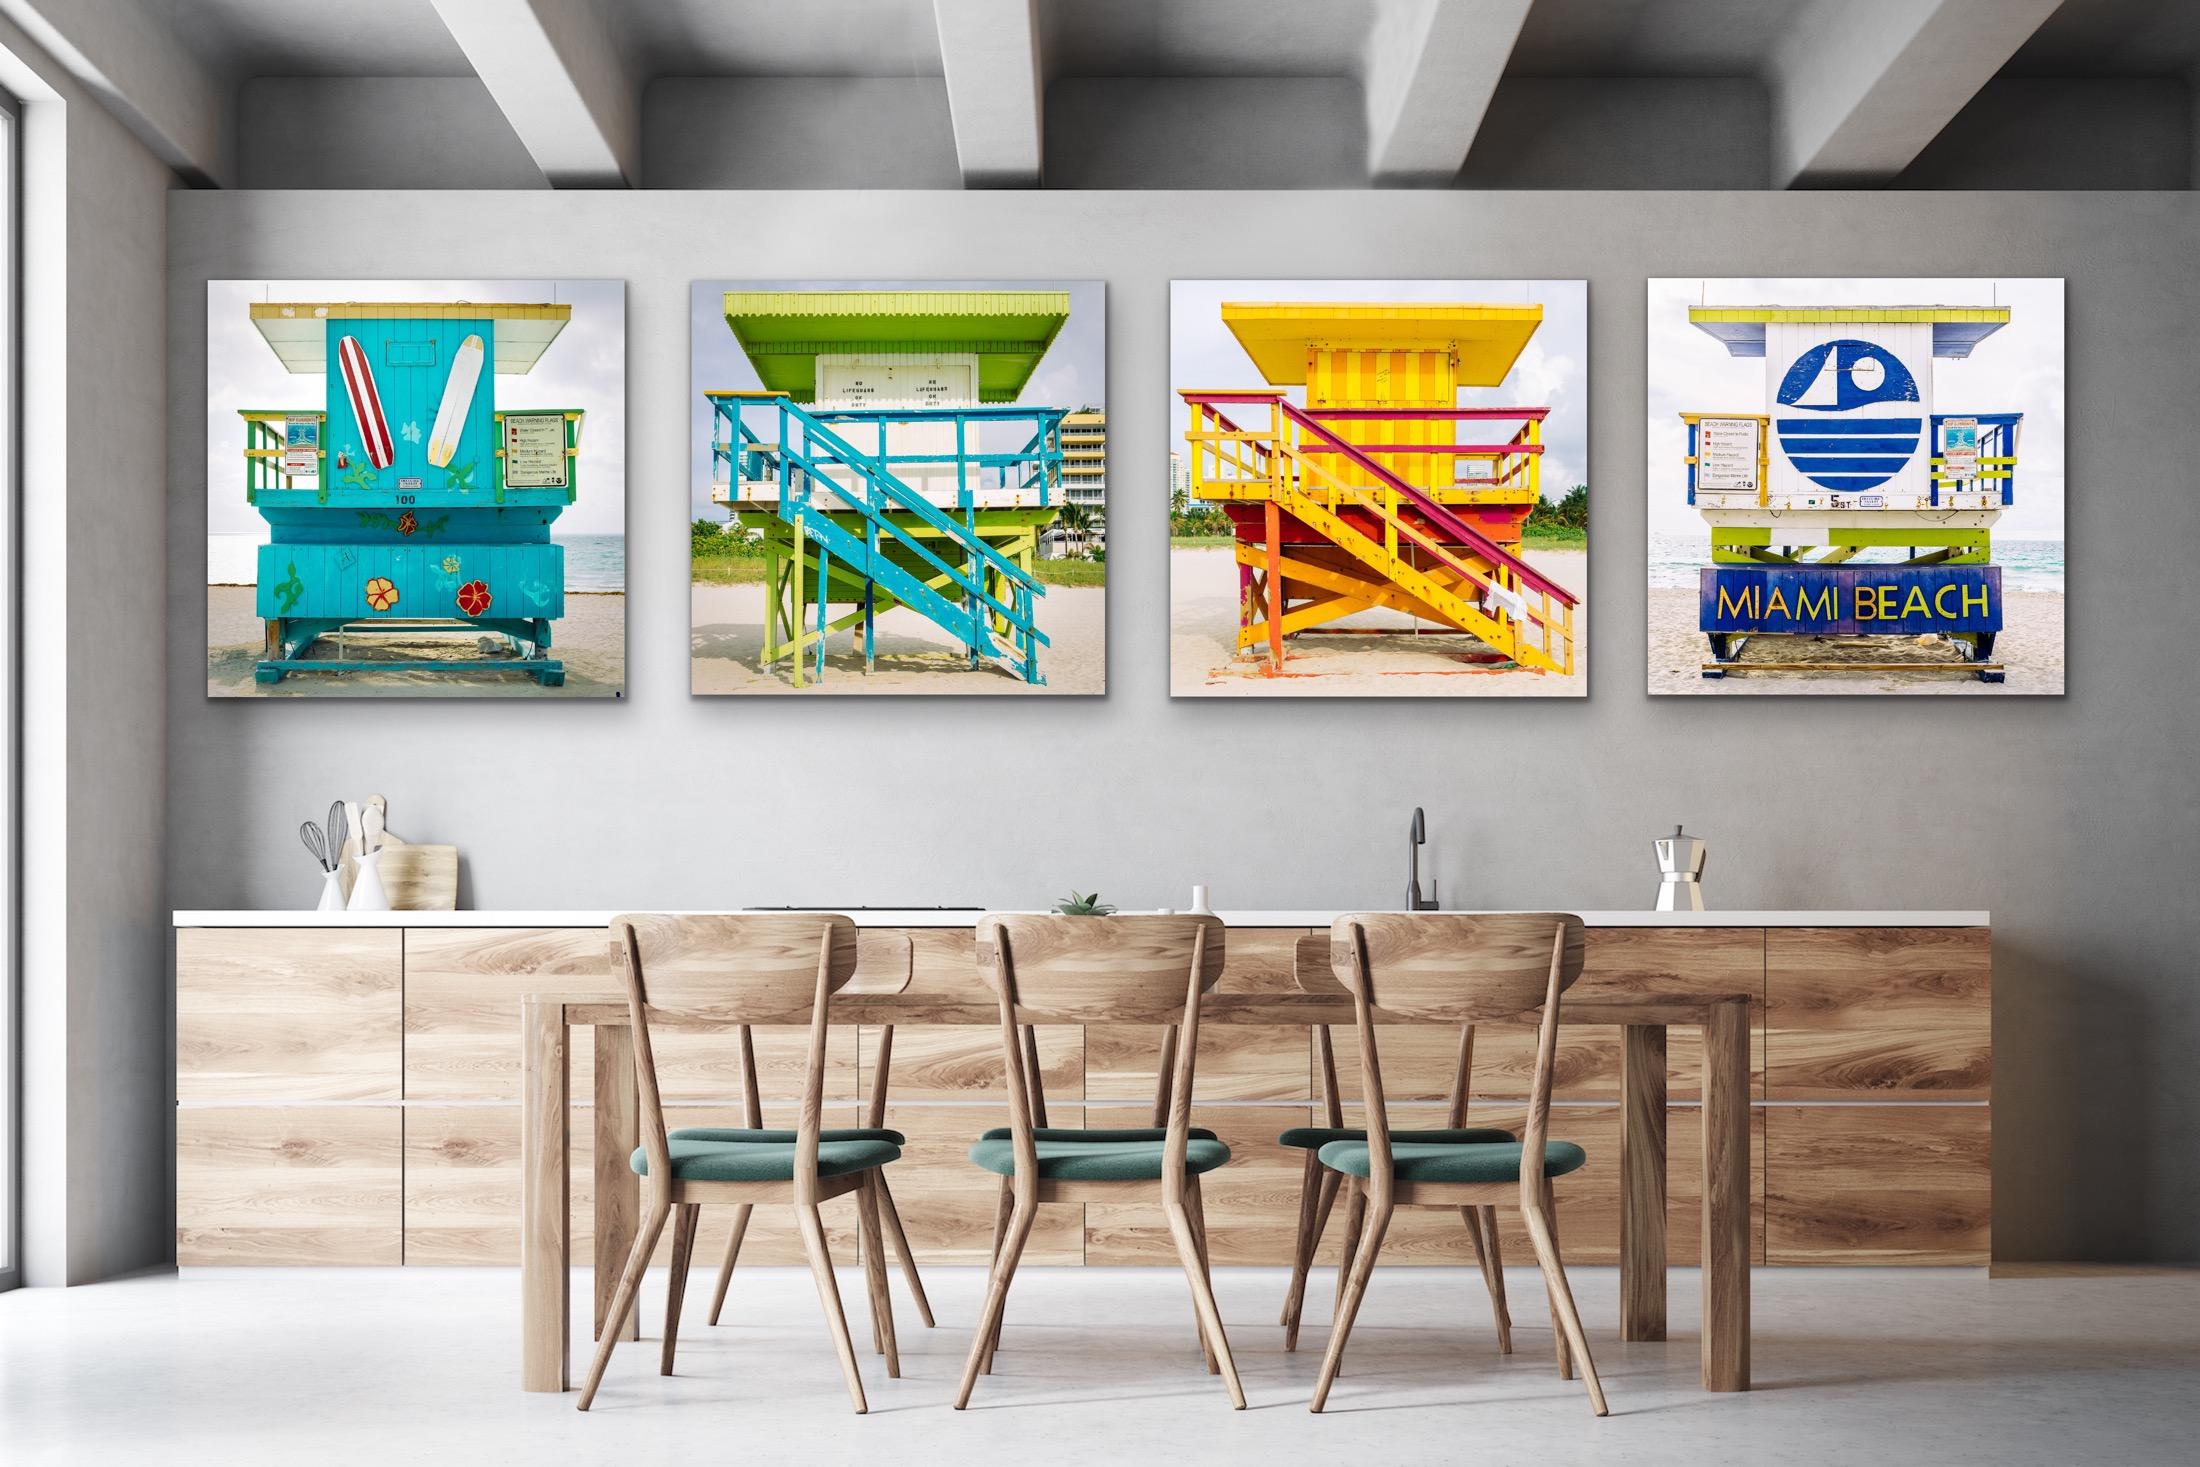 This contemporary coastal photograph by Peter Mendelson features a close-up view of a bright teal, green, and yellow lifeguard stand in Miami, Florida. The blue, vertical panels of the stand are decorated with mounted striped surfboards, painted